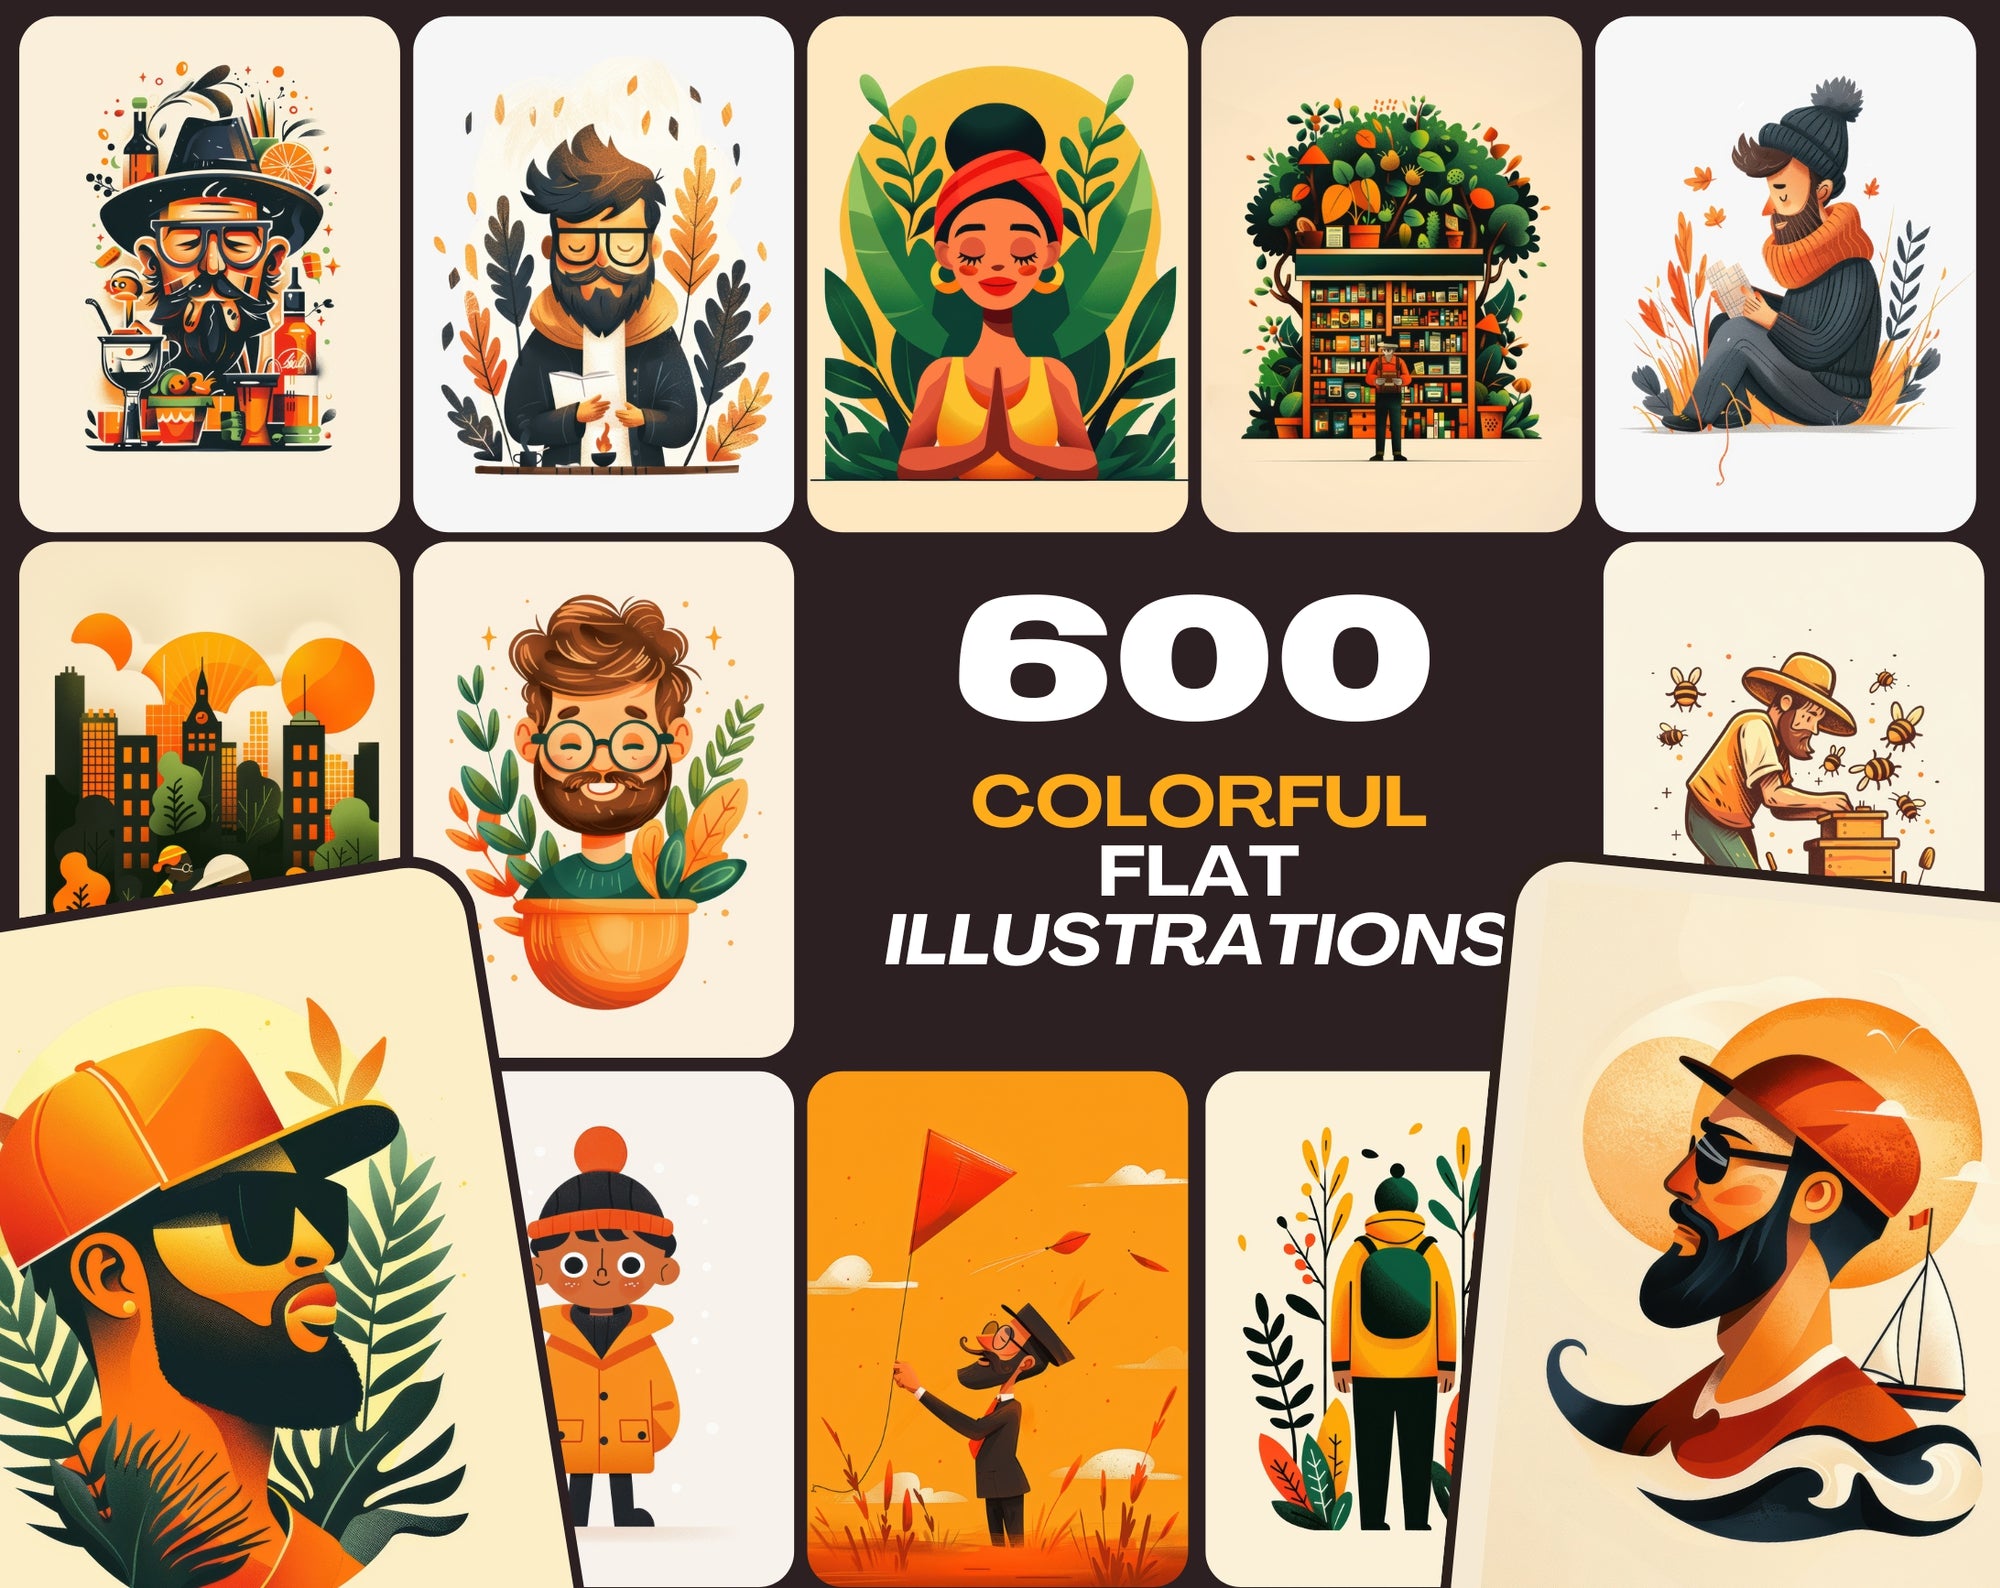 Autumn-Themed Flat Illustrations Pack – 600 Warm, Miniature-Style Images with Commercial License